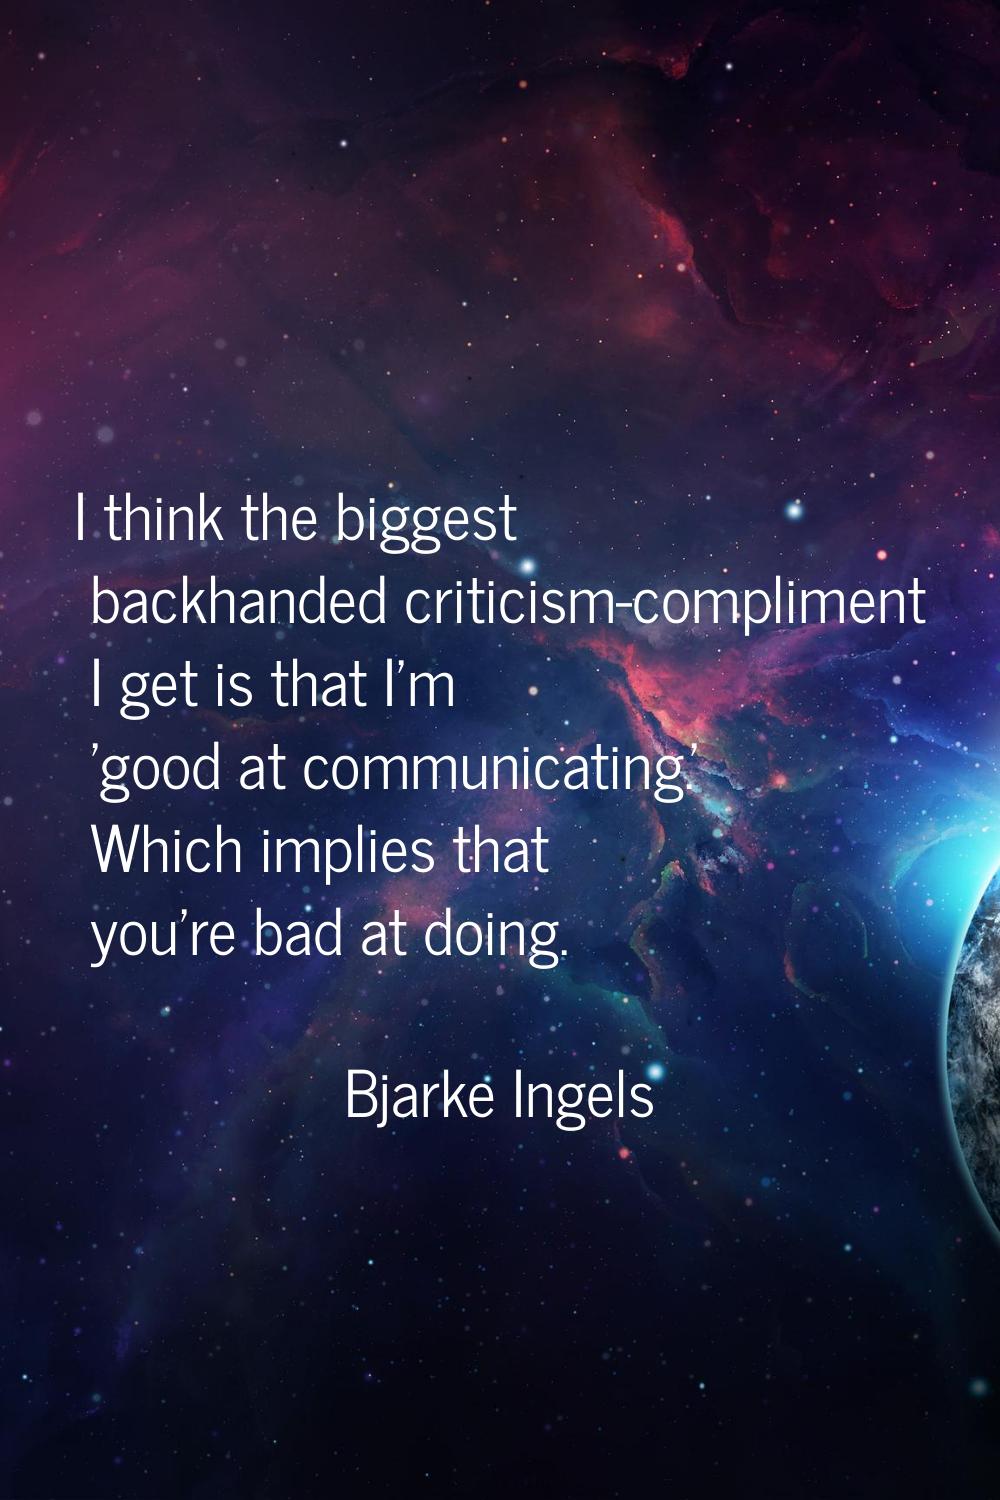 I think the biggest backhanded criticism-compliment I get is that I'm 'good at communicating.' Whic